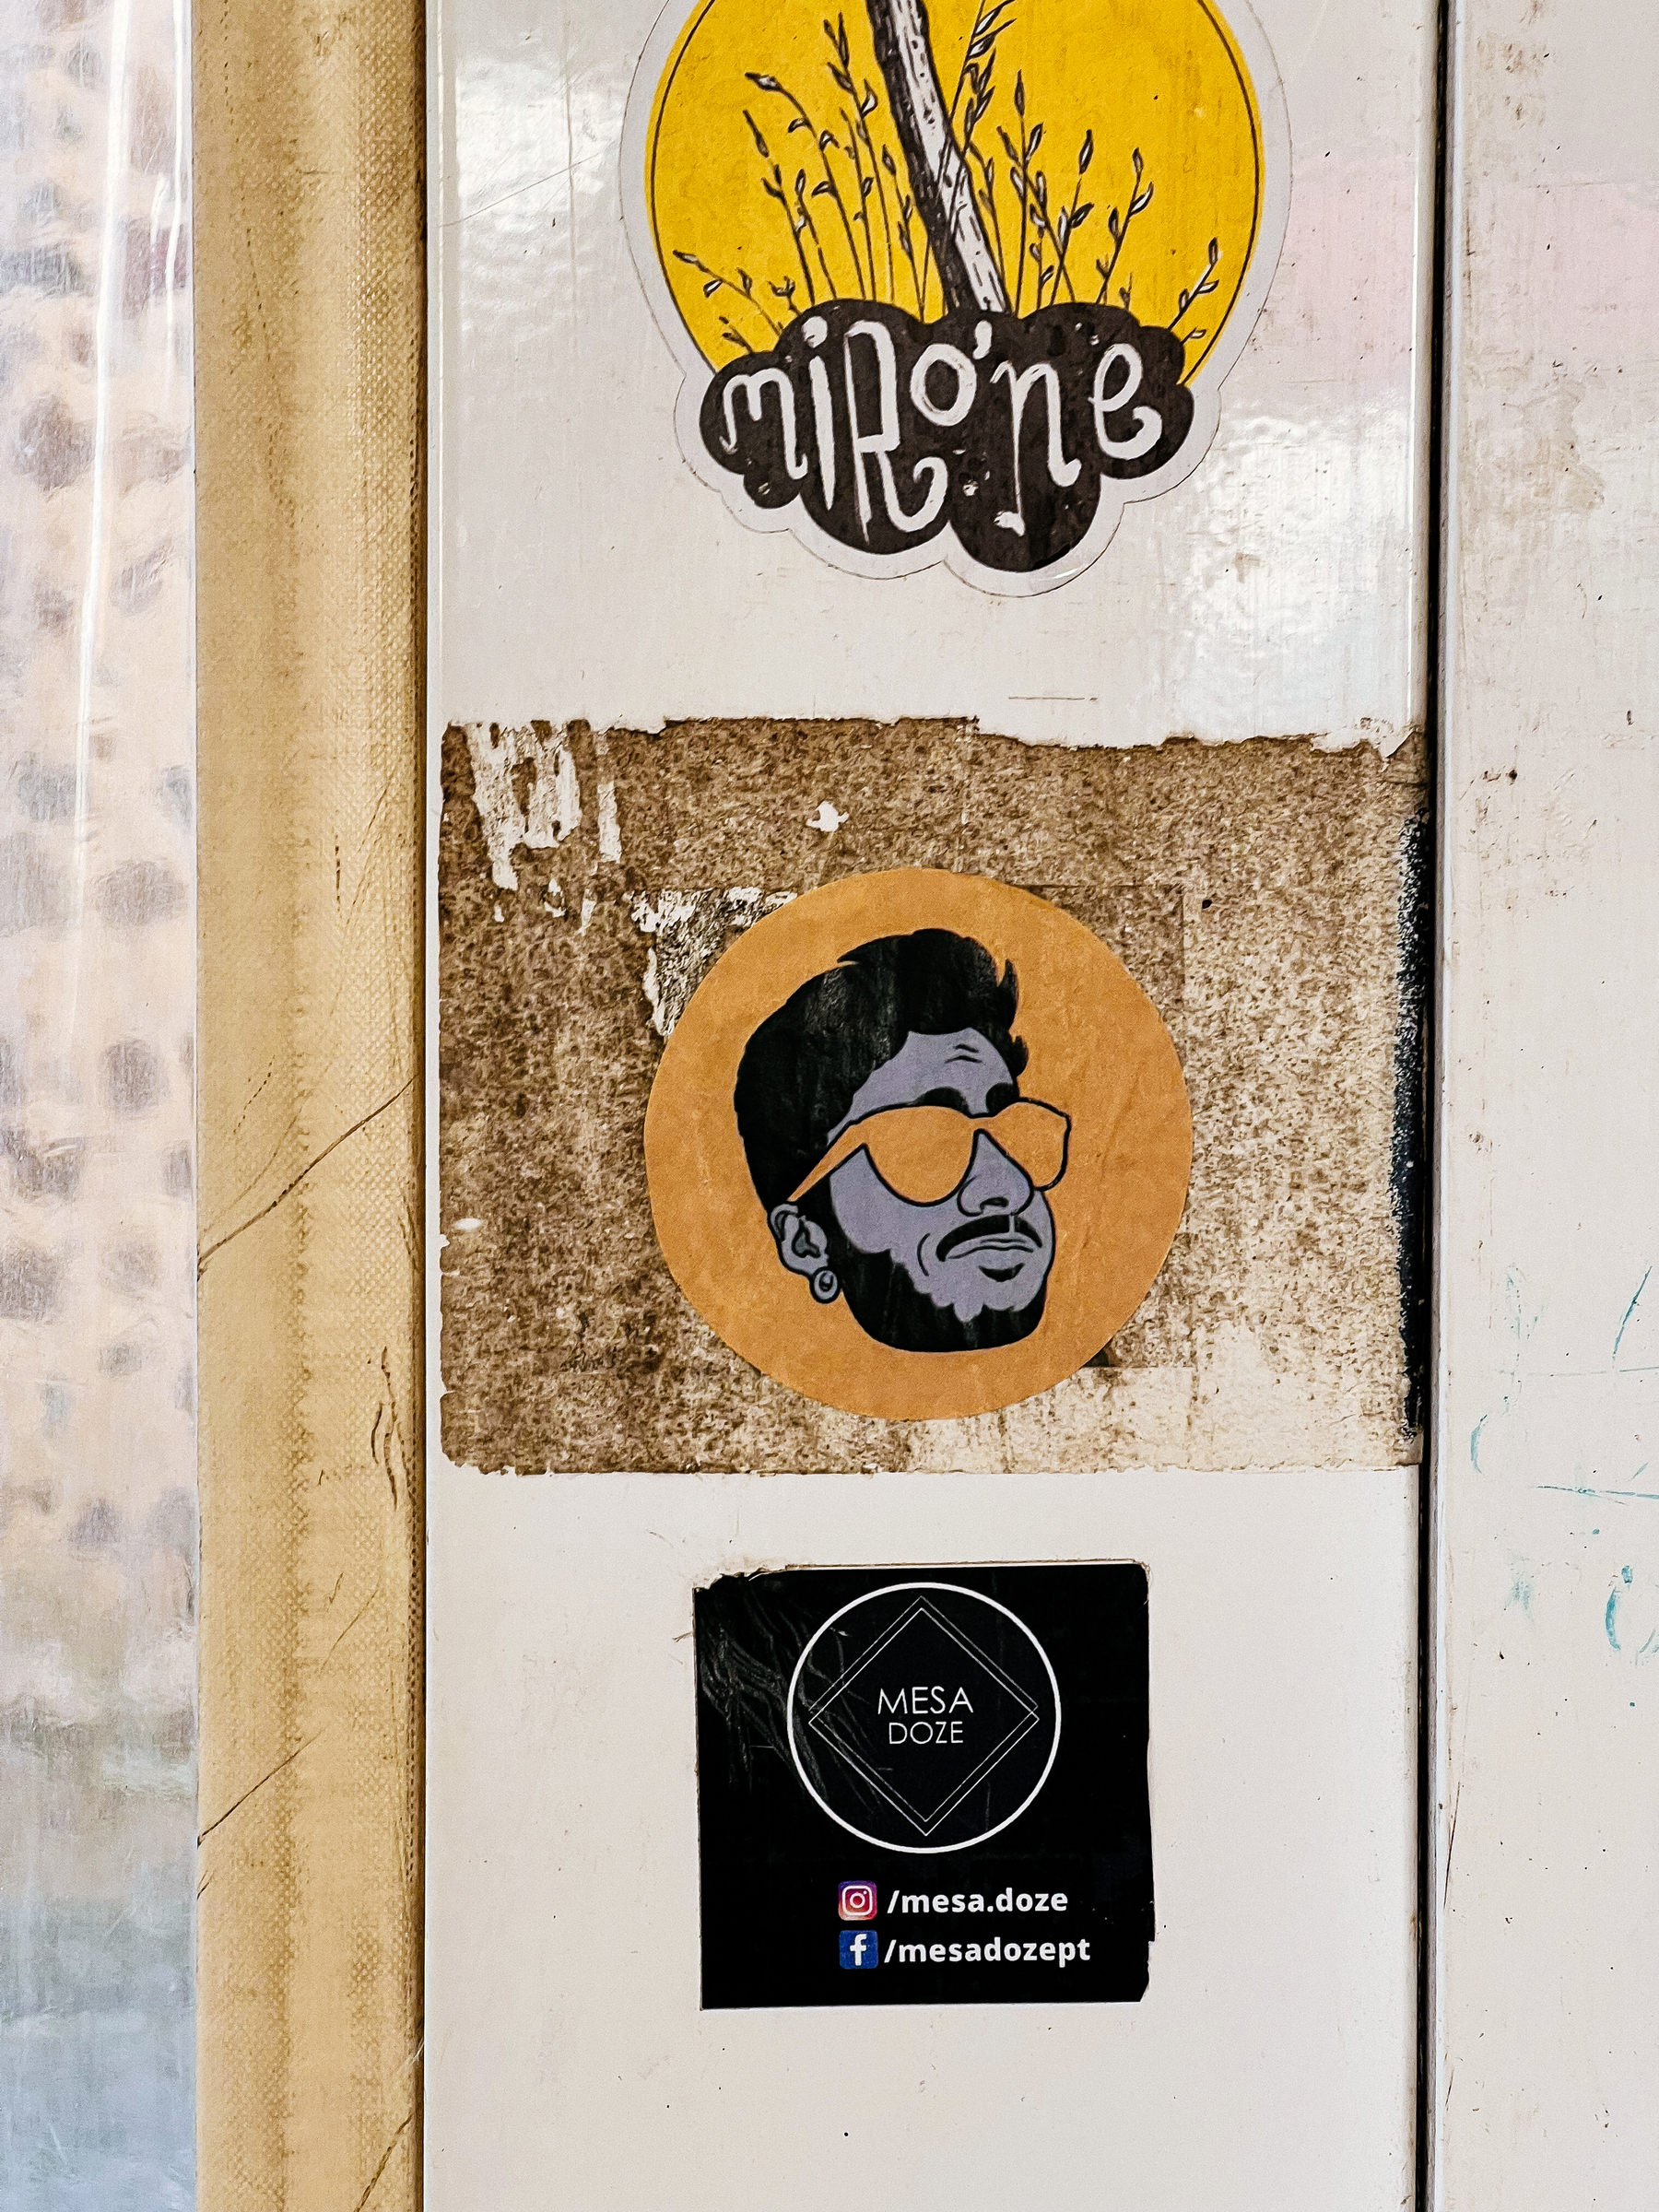 Stickers on a worn surface show a portrait and logos. They depict a bearded man wearing glasses and two brand names with social media handles.